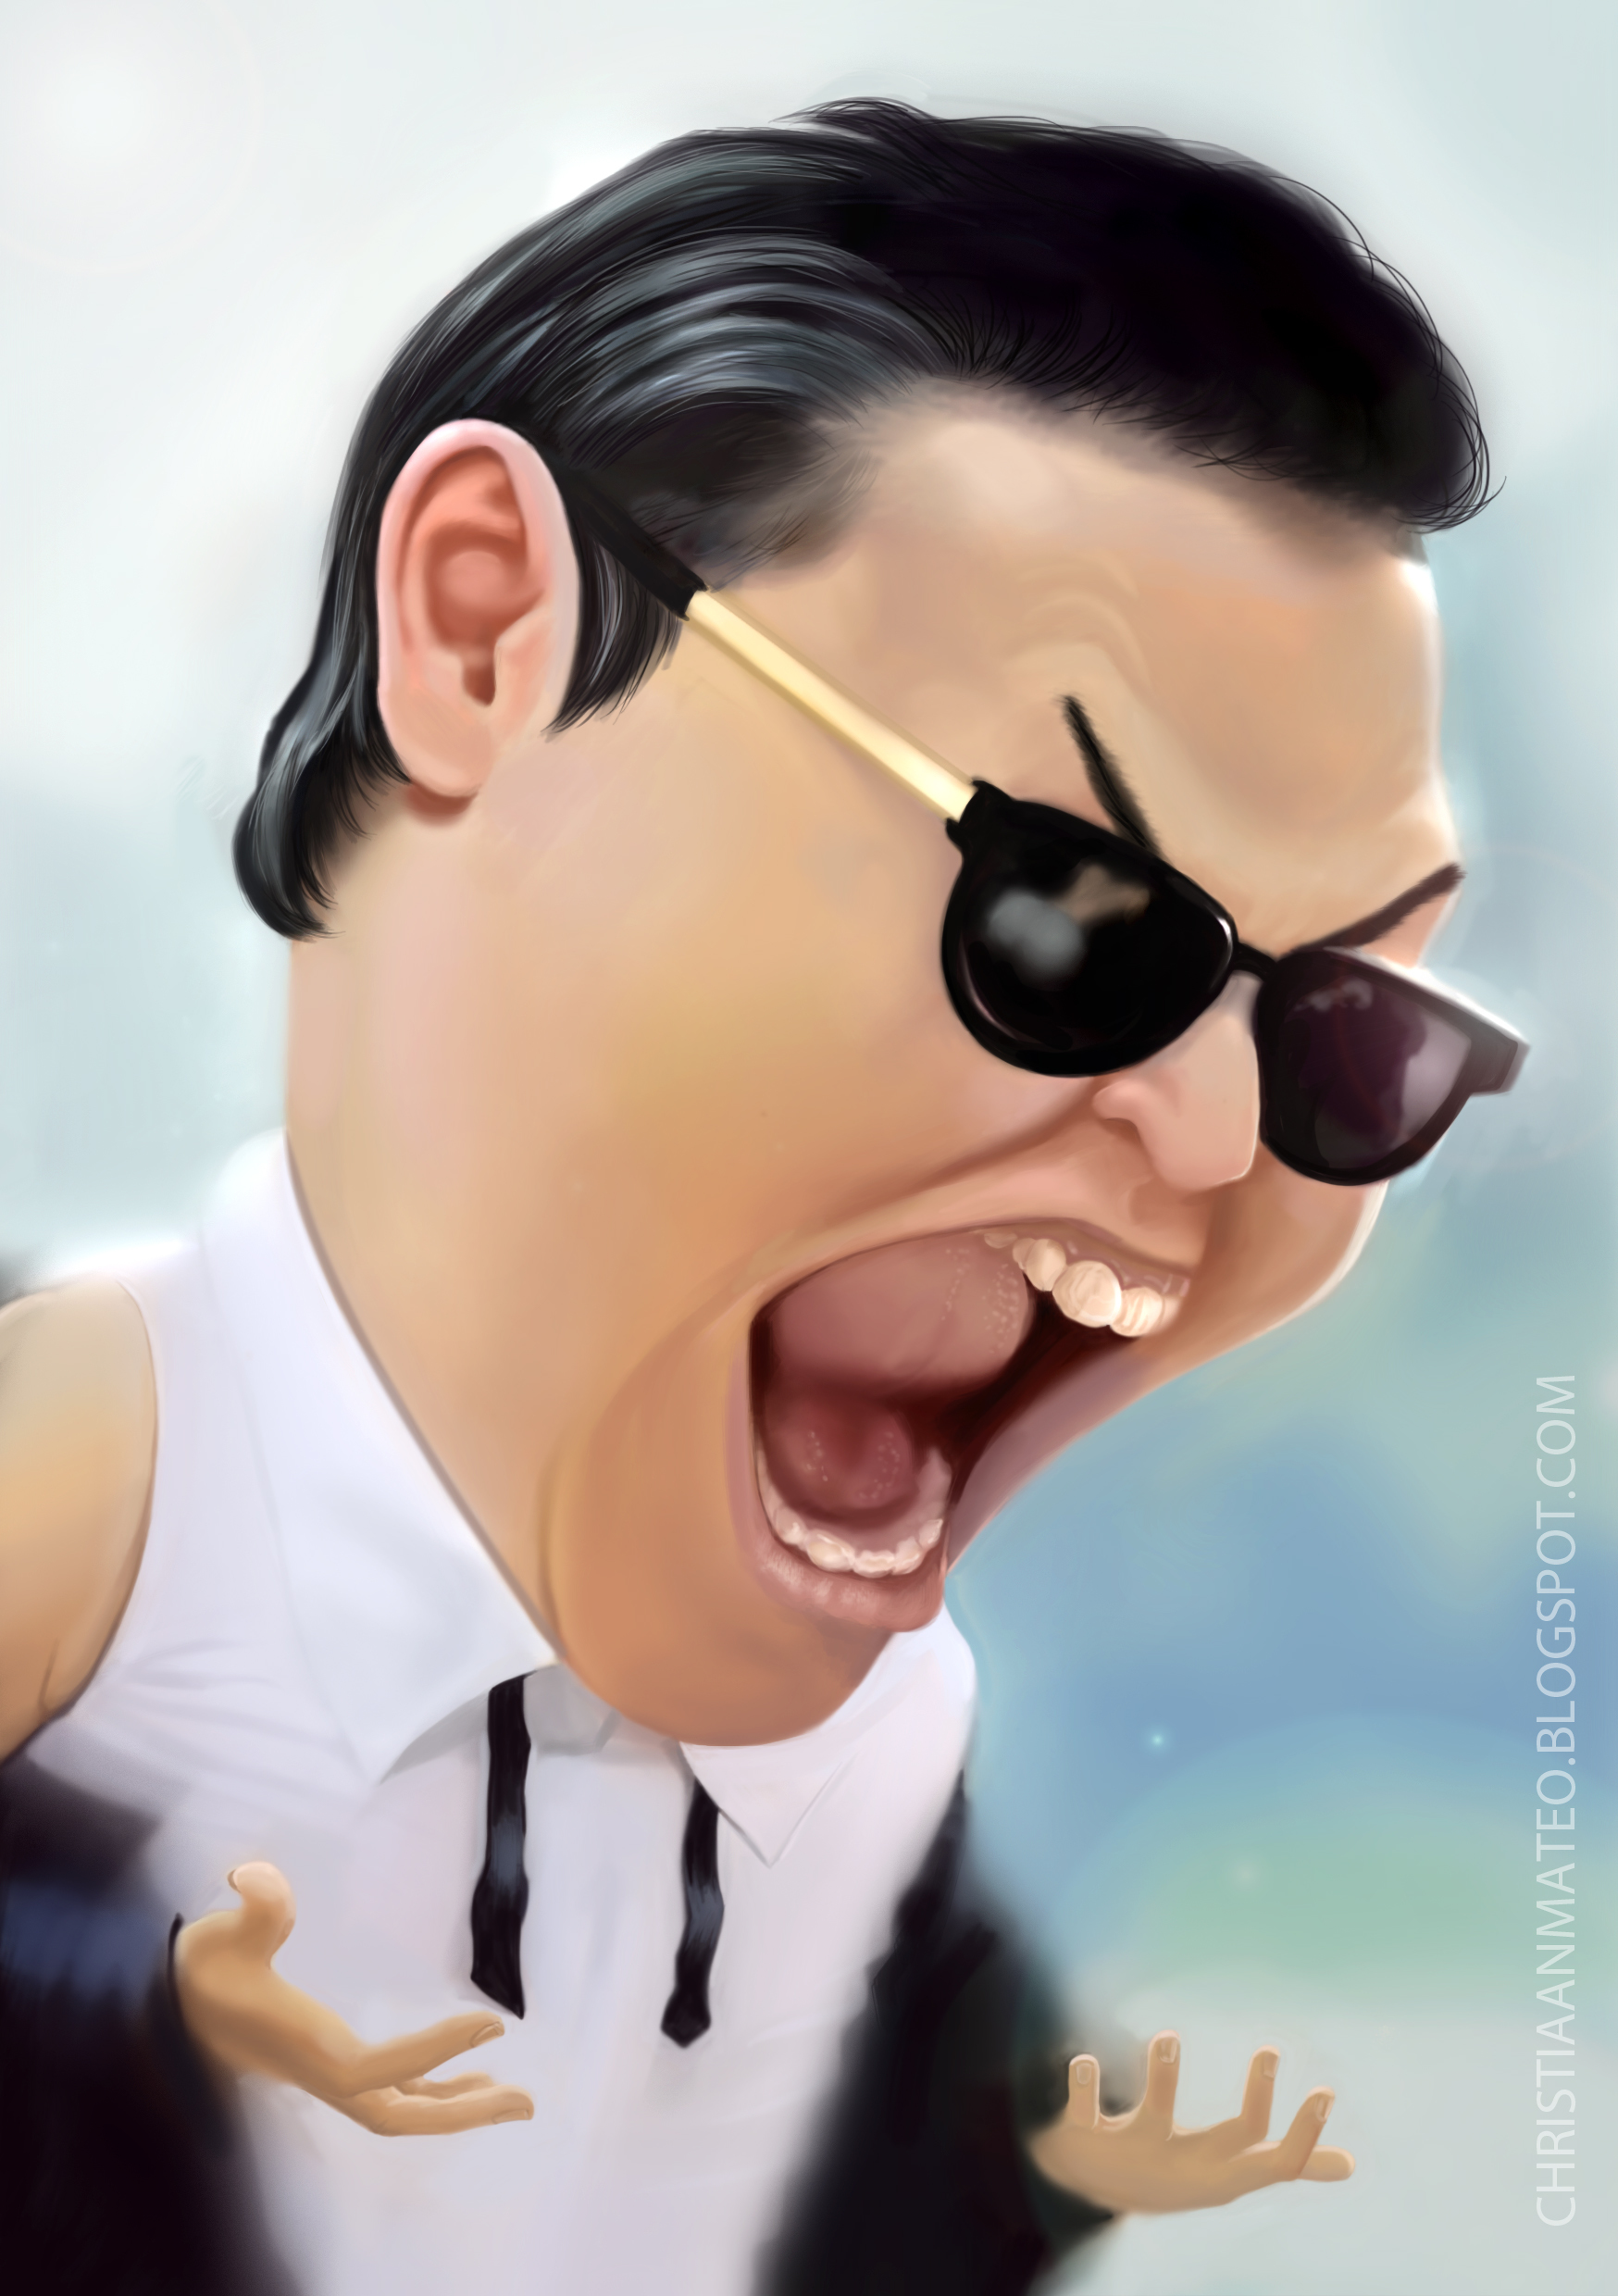 PSY gangnam style hit wallpaper and image, picture